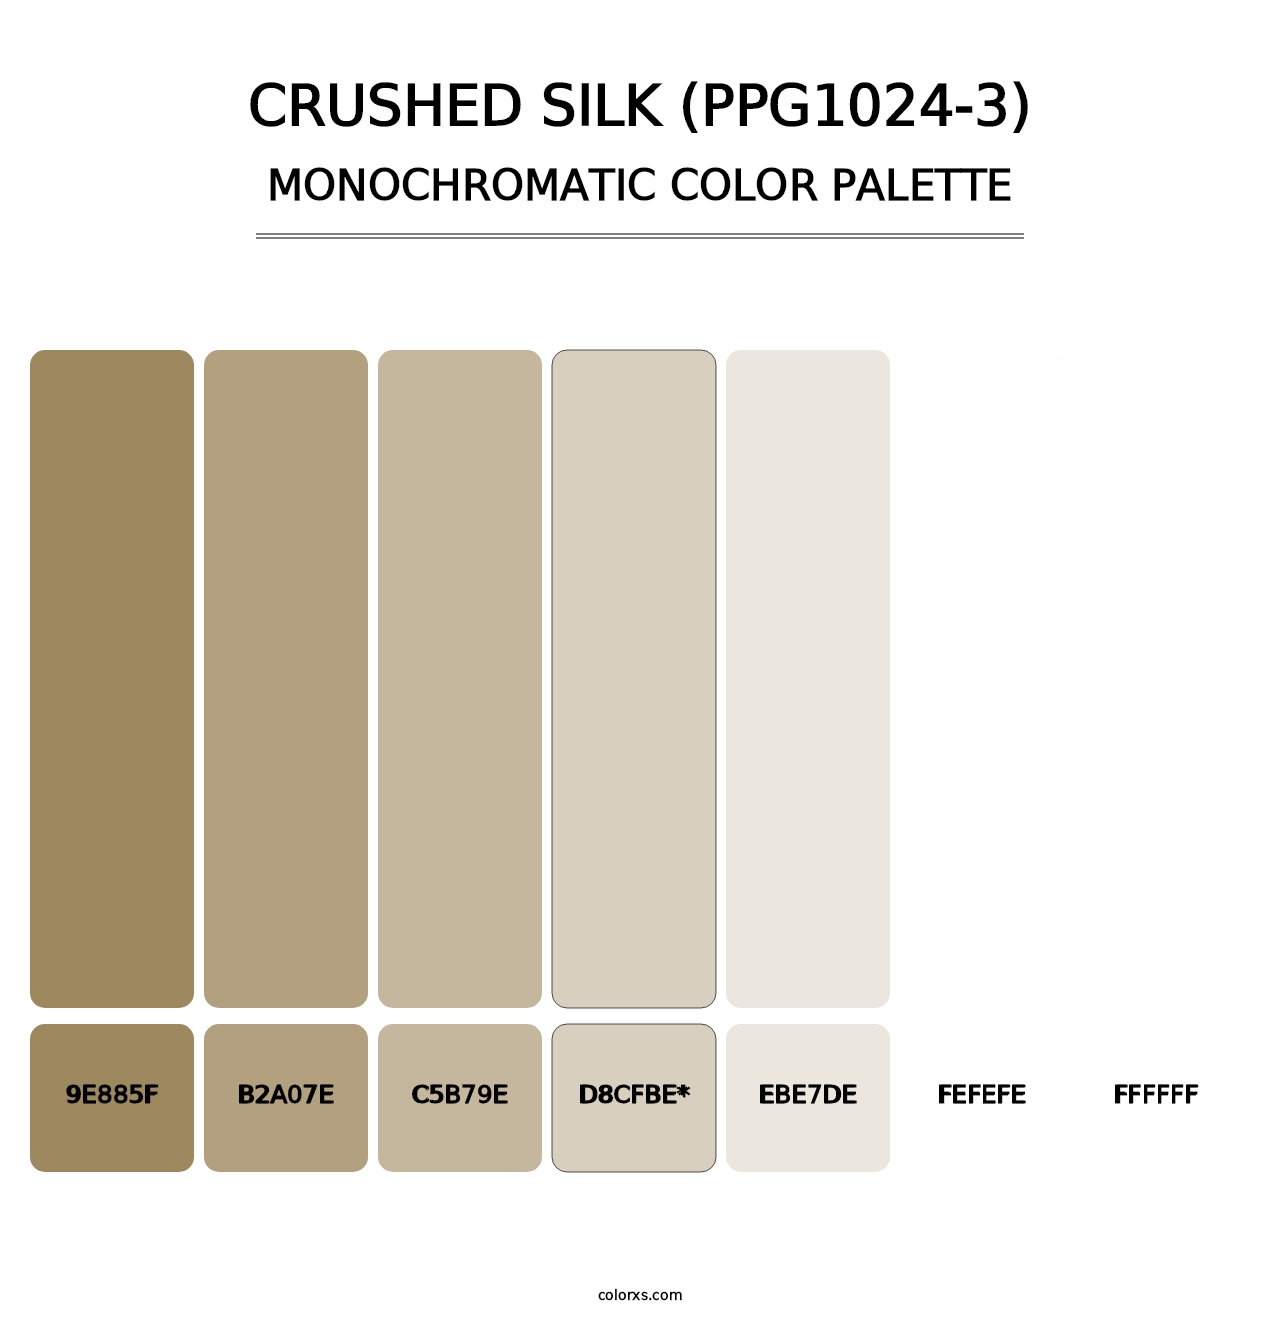 Crushed Silk (PPG1024-3) - Monochromatic Color Palette